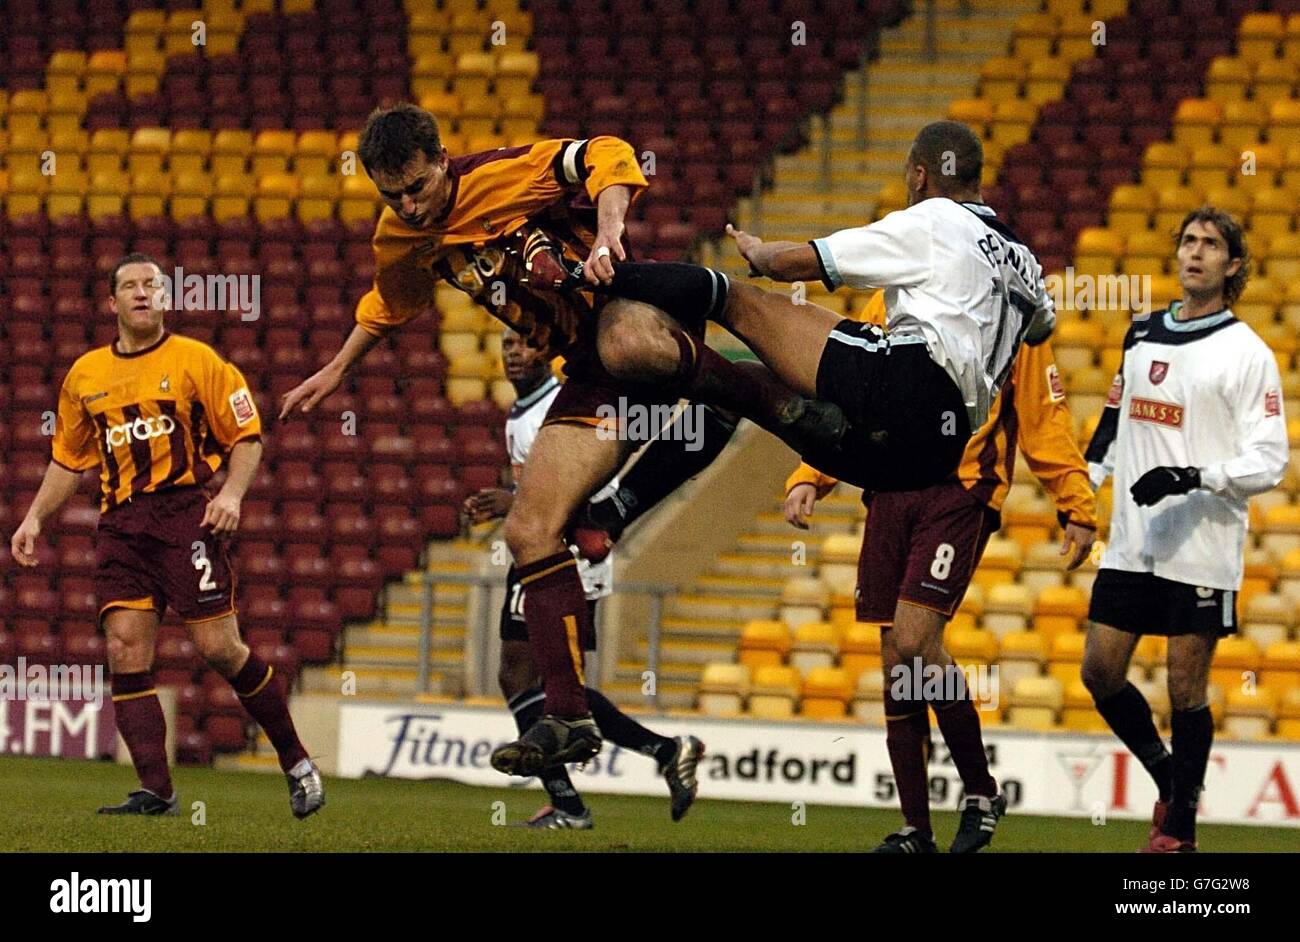 Bradford City's David Weatherall (left) challenges Walsall's Julian Bennett for a high ball during the Coca-Cola League One match at Valley Parade, Bradford, Saturday December 11, 2004. Stock Photo